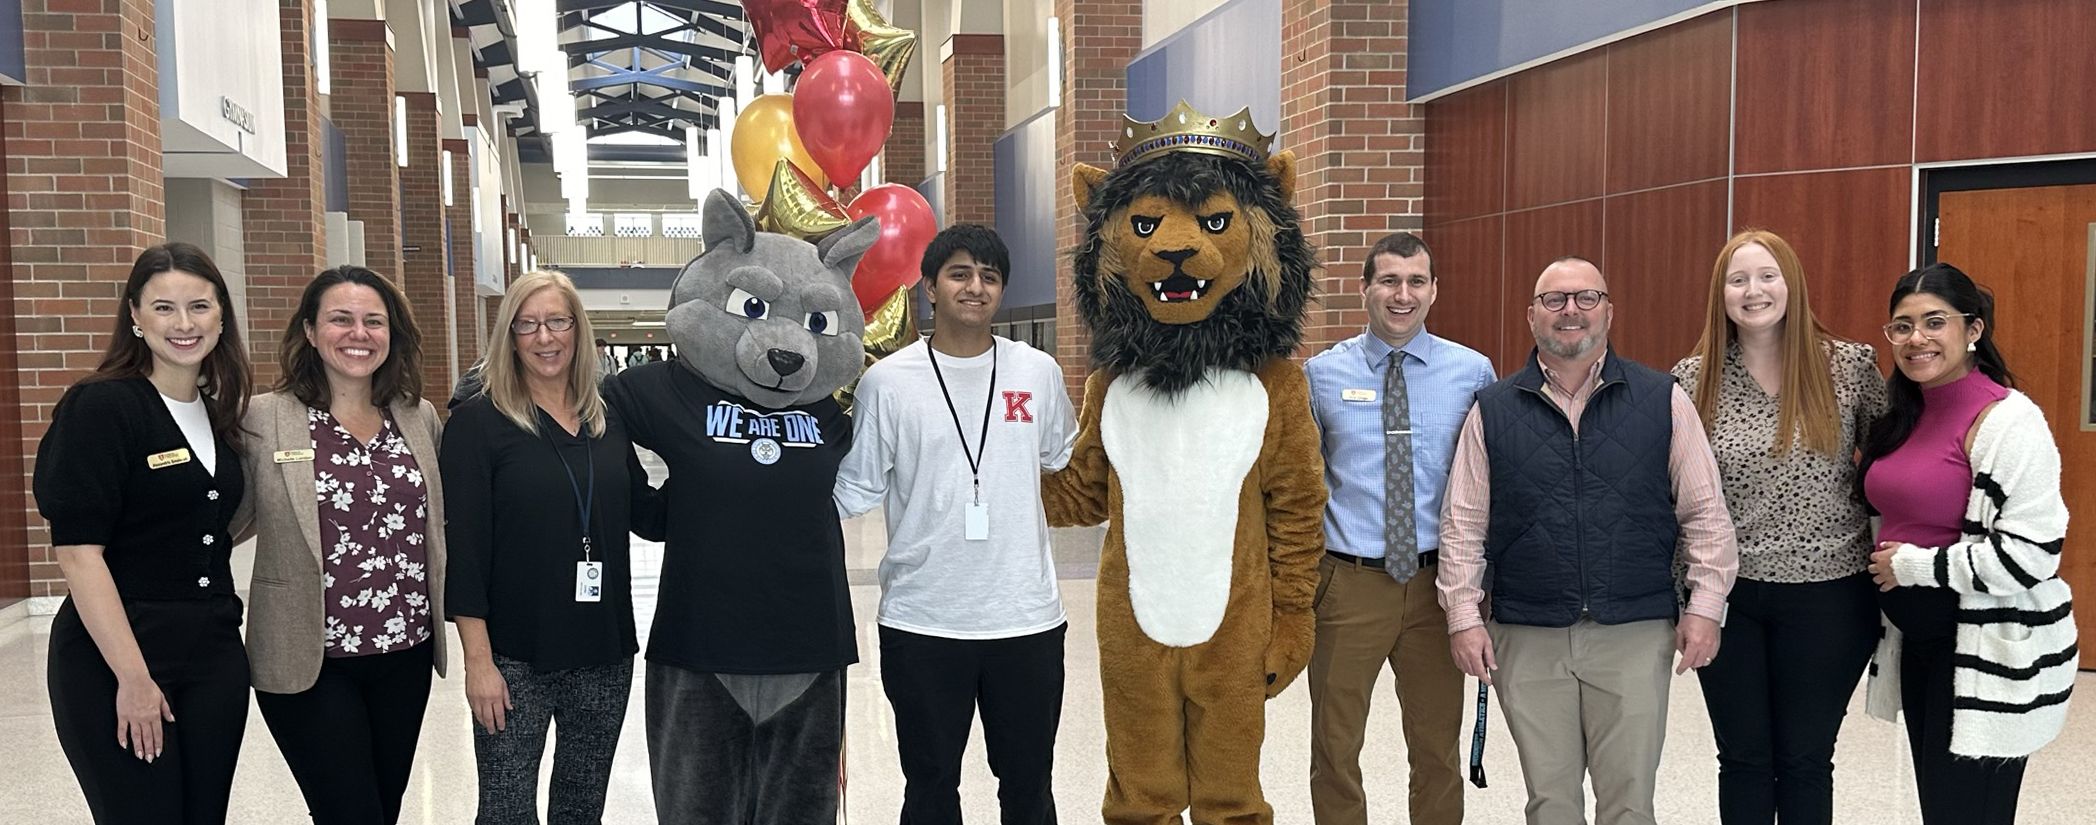 King's Admission Staff with Mann